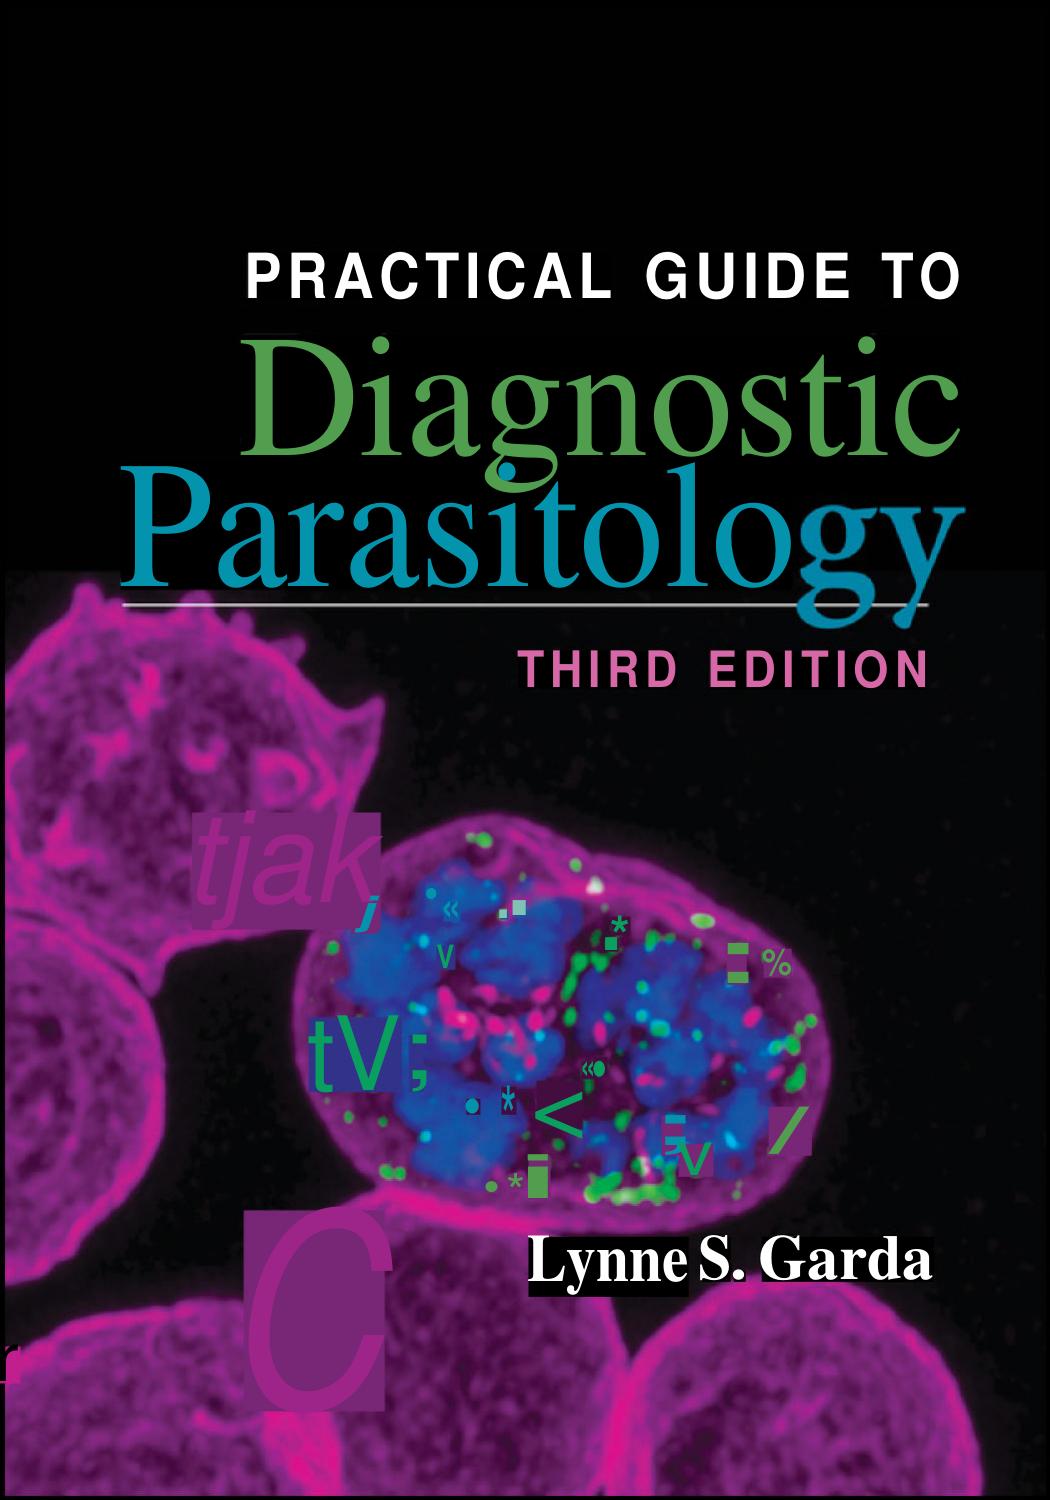 Practical Guide to Diagnostic Parasitology